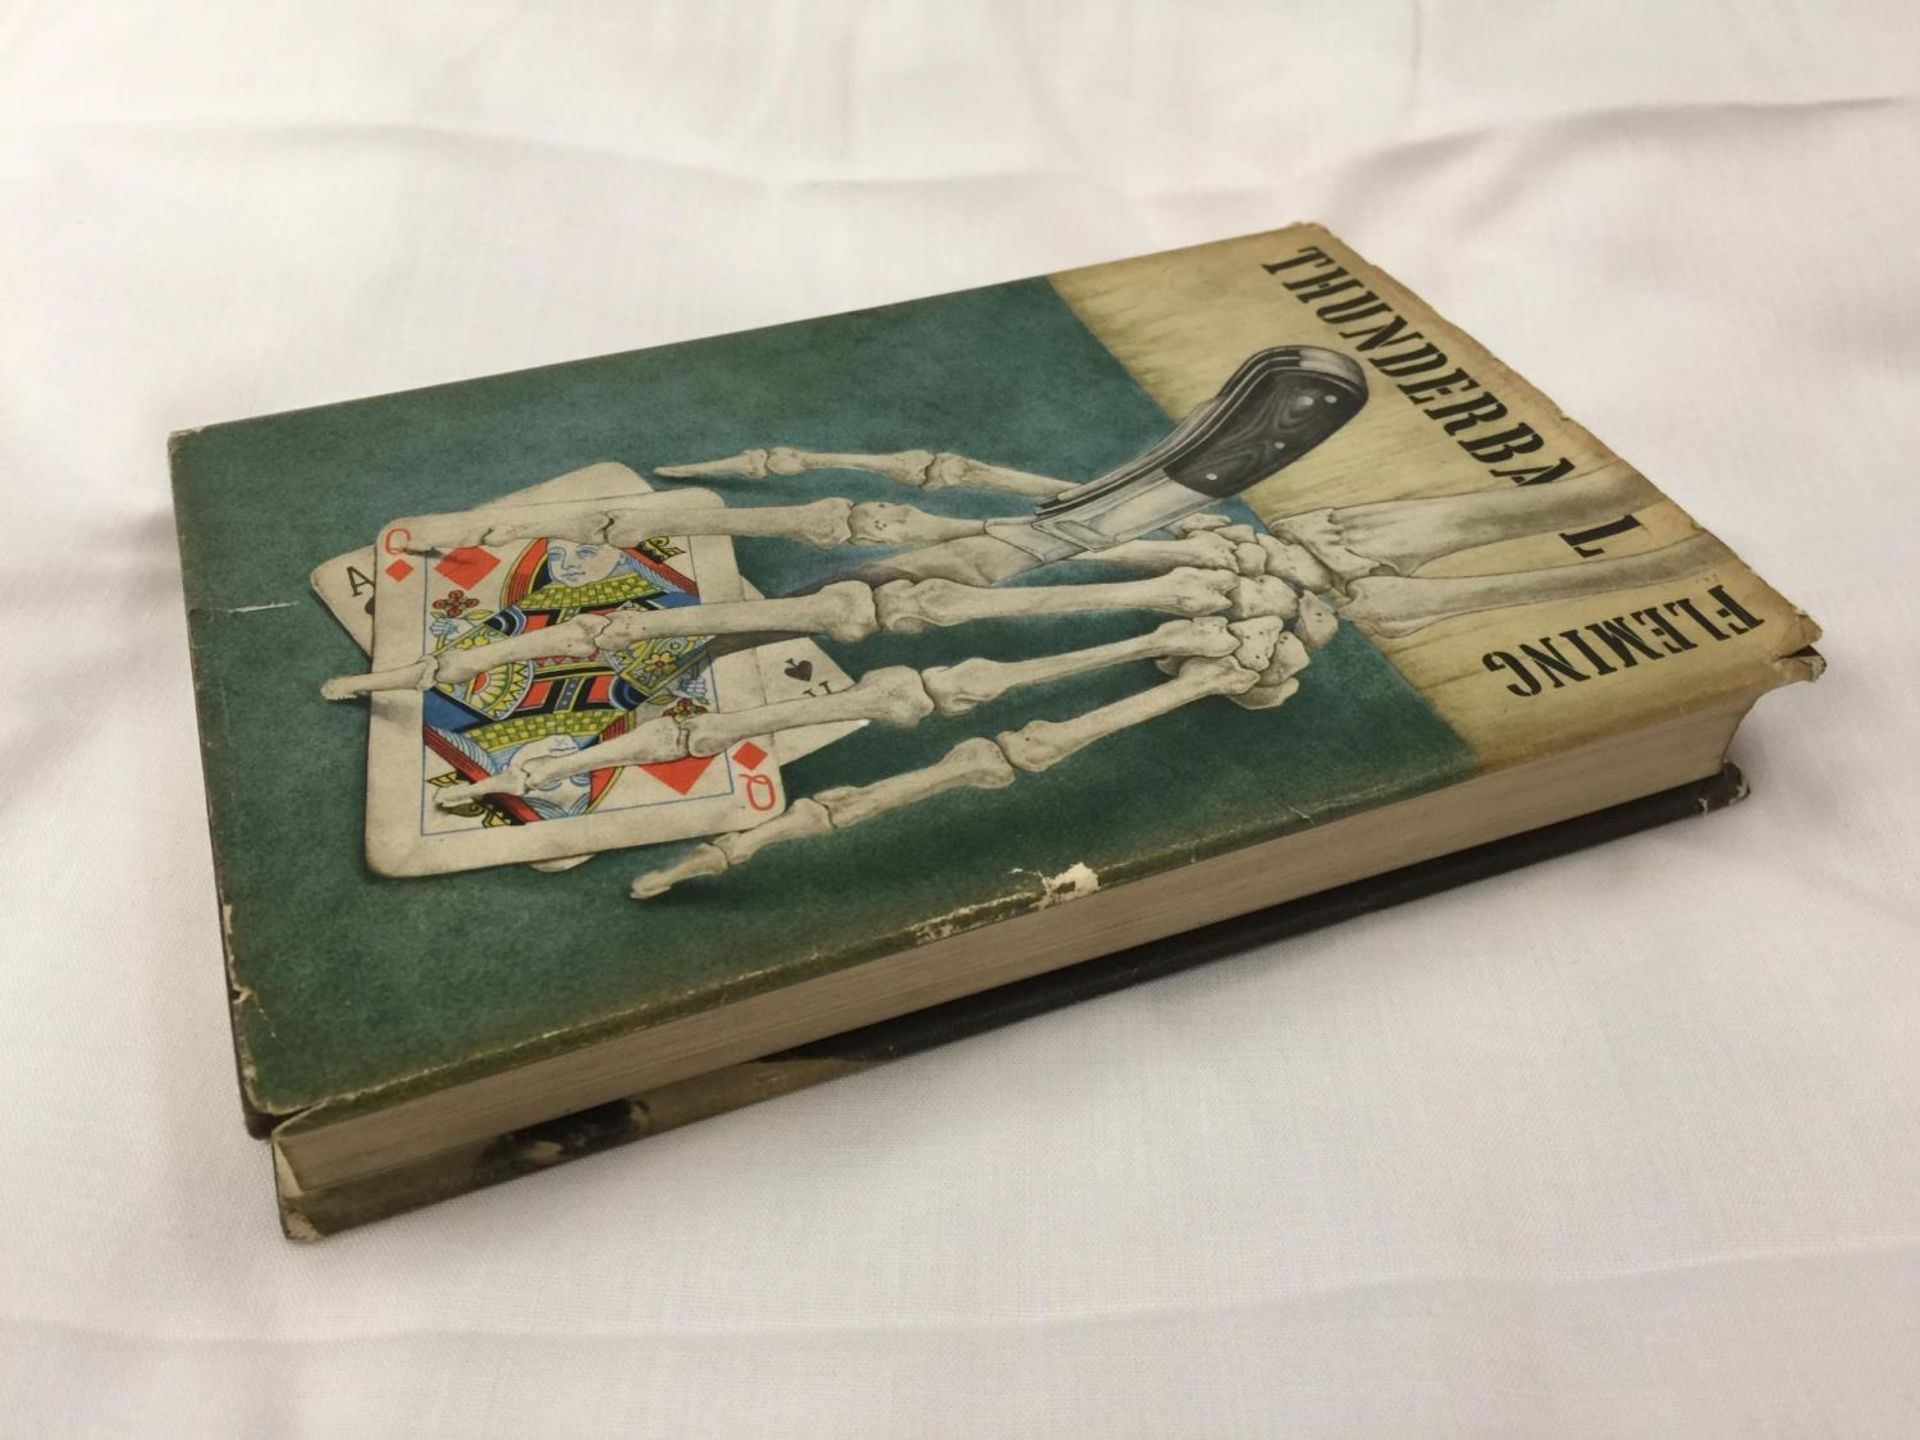 A FIRST EDITION JAMES BOND NOVEL - THUNDERBALL BY IAN FLEMING, HARDBACK WITH ORIGINAL DUST - Image 5 of 10